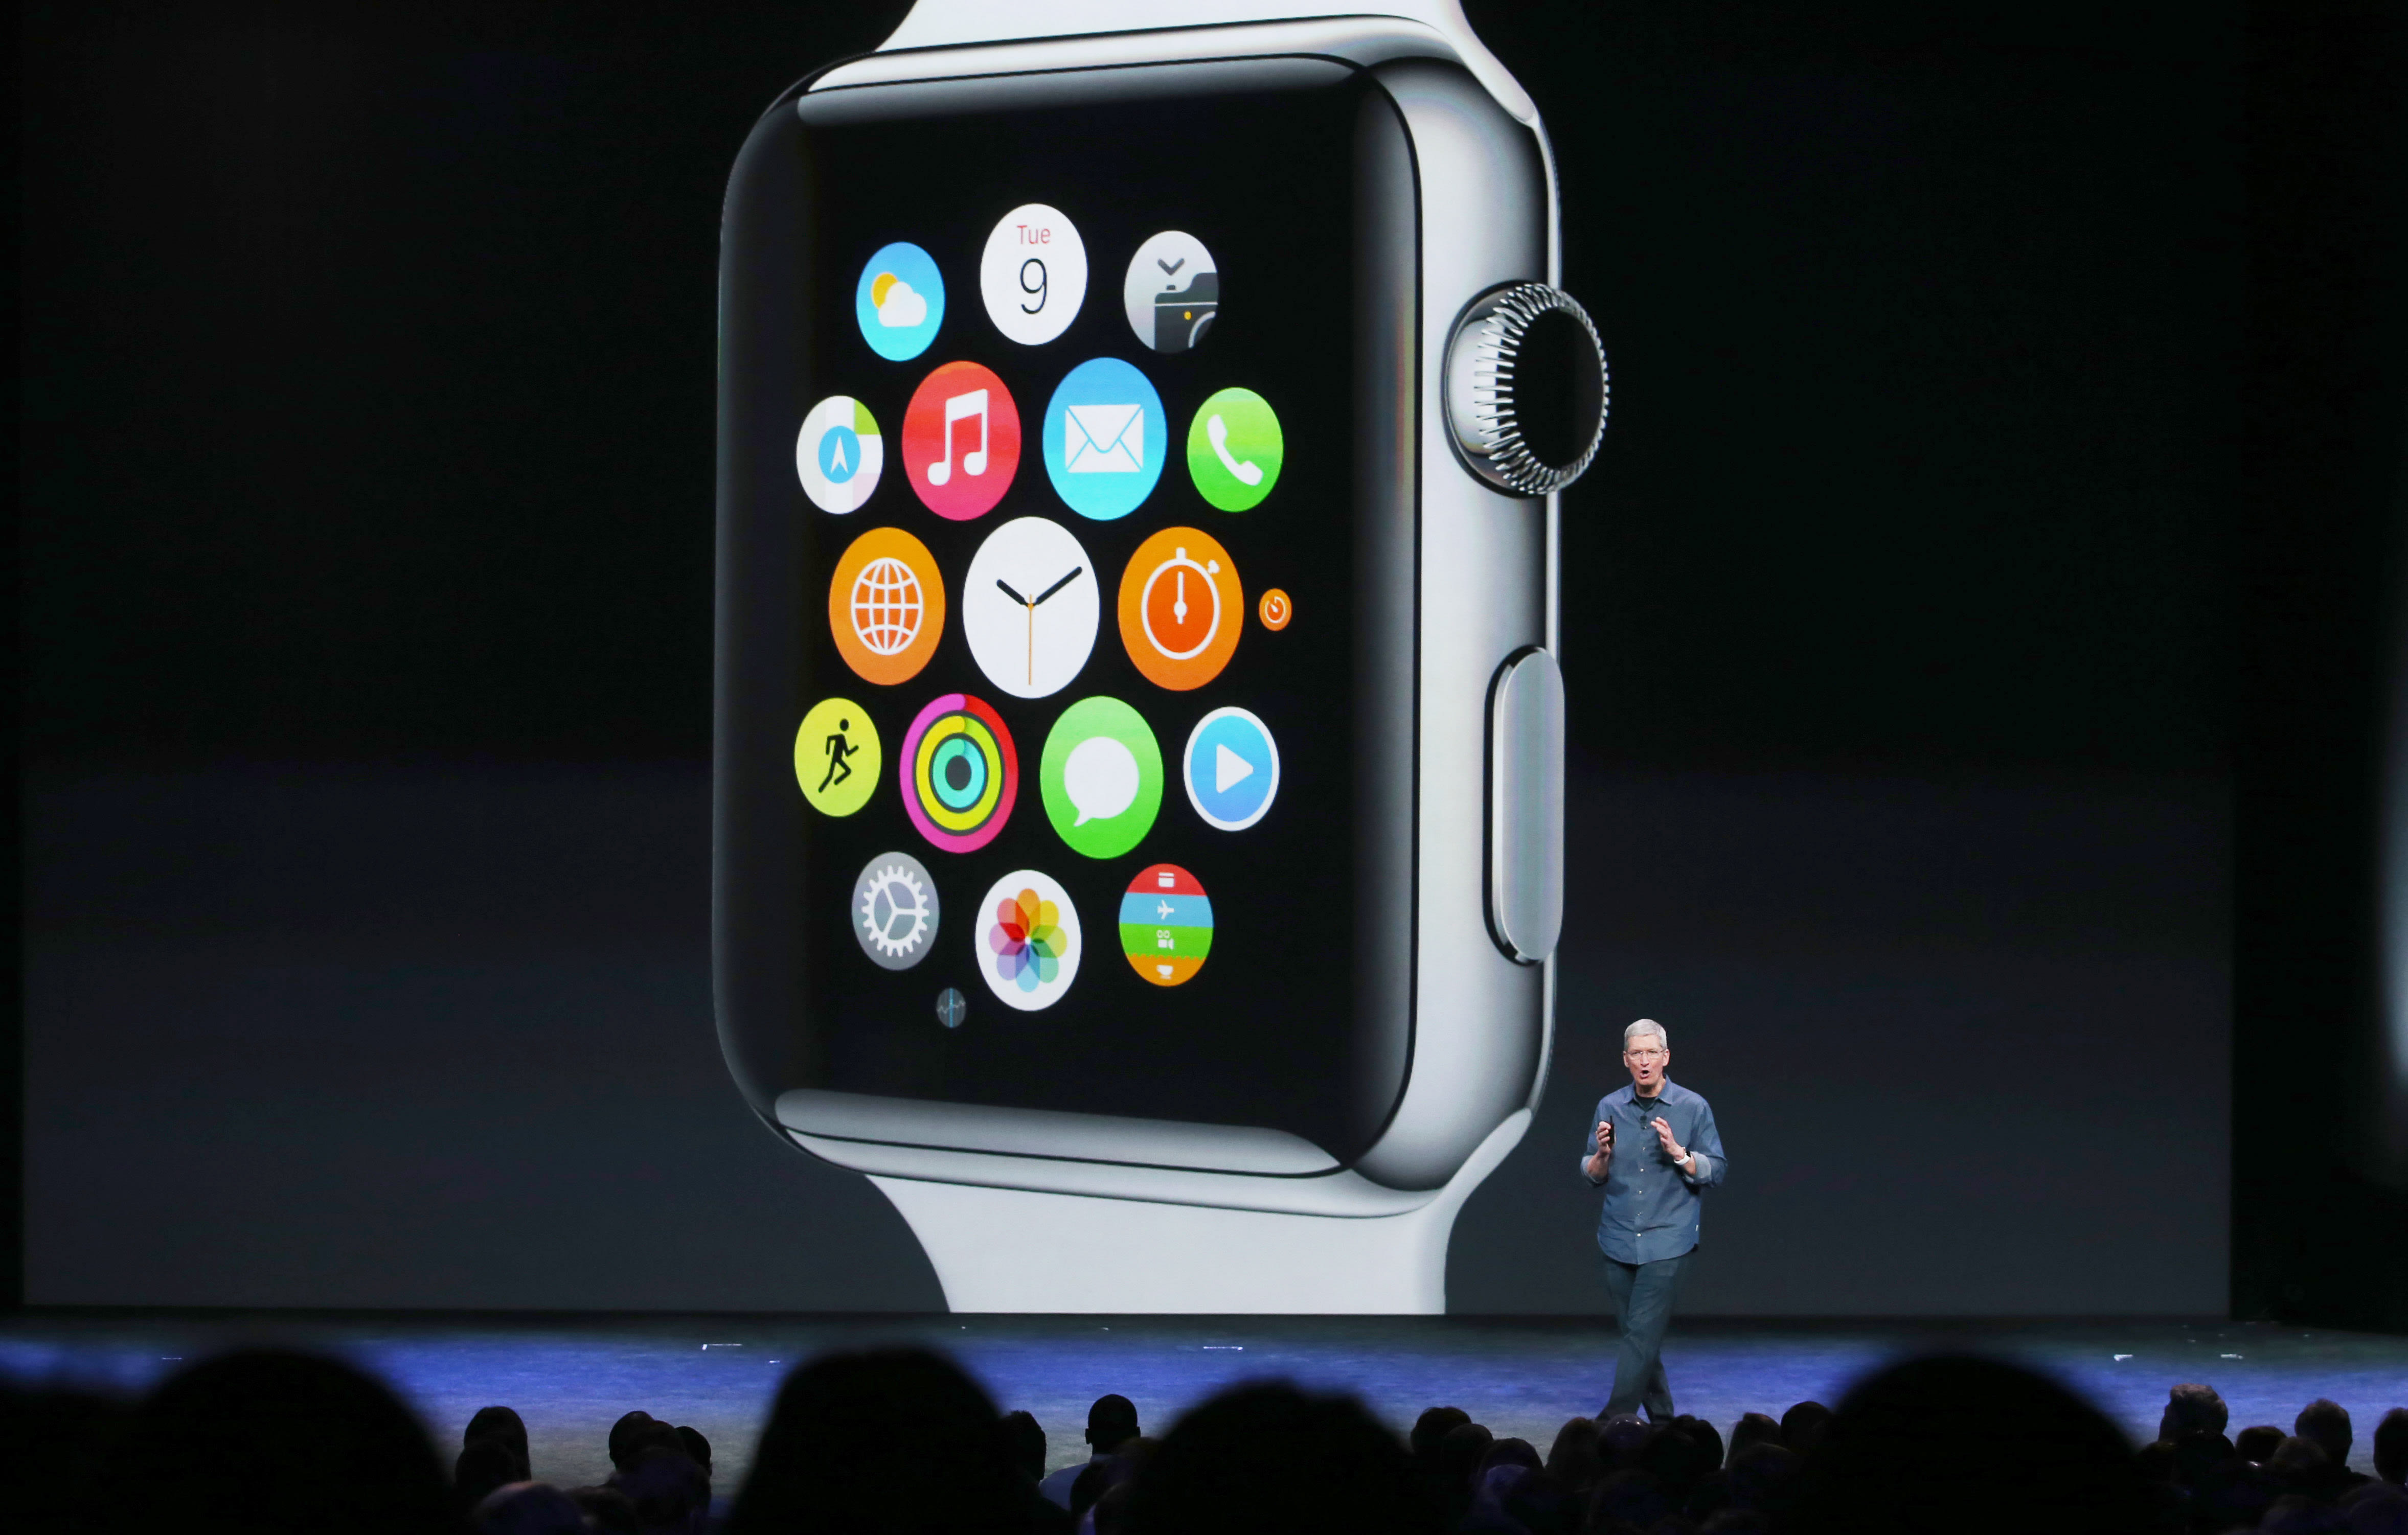 Apple CEO Tim Cook unveils the Apple Watch in September 2014.